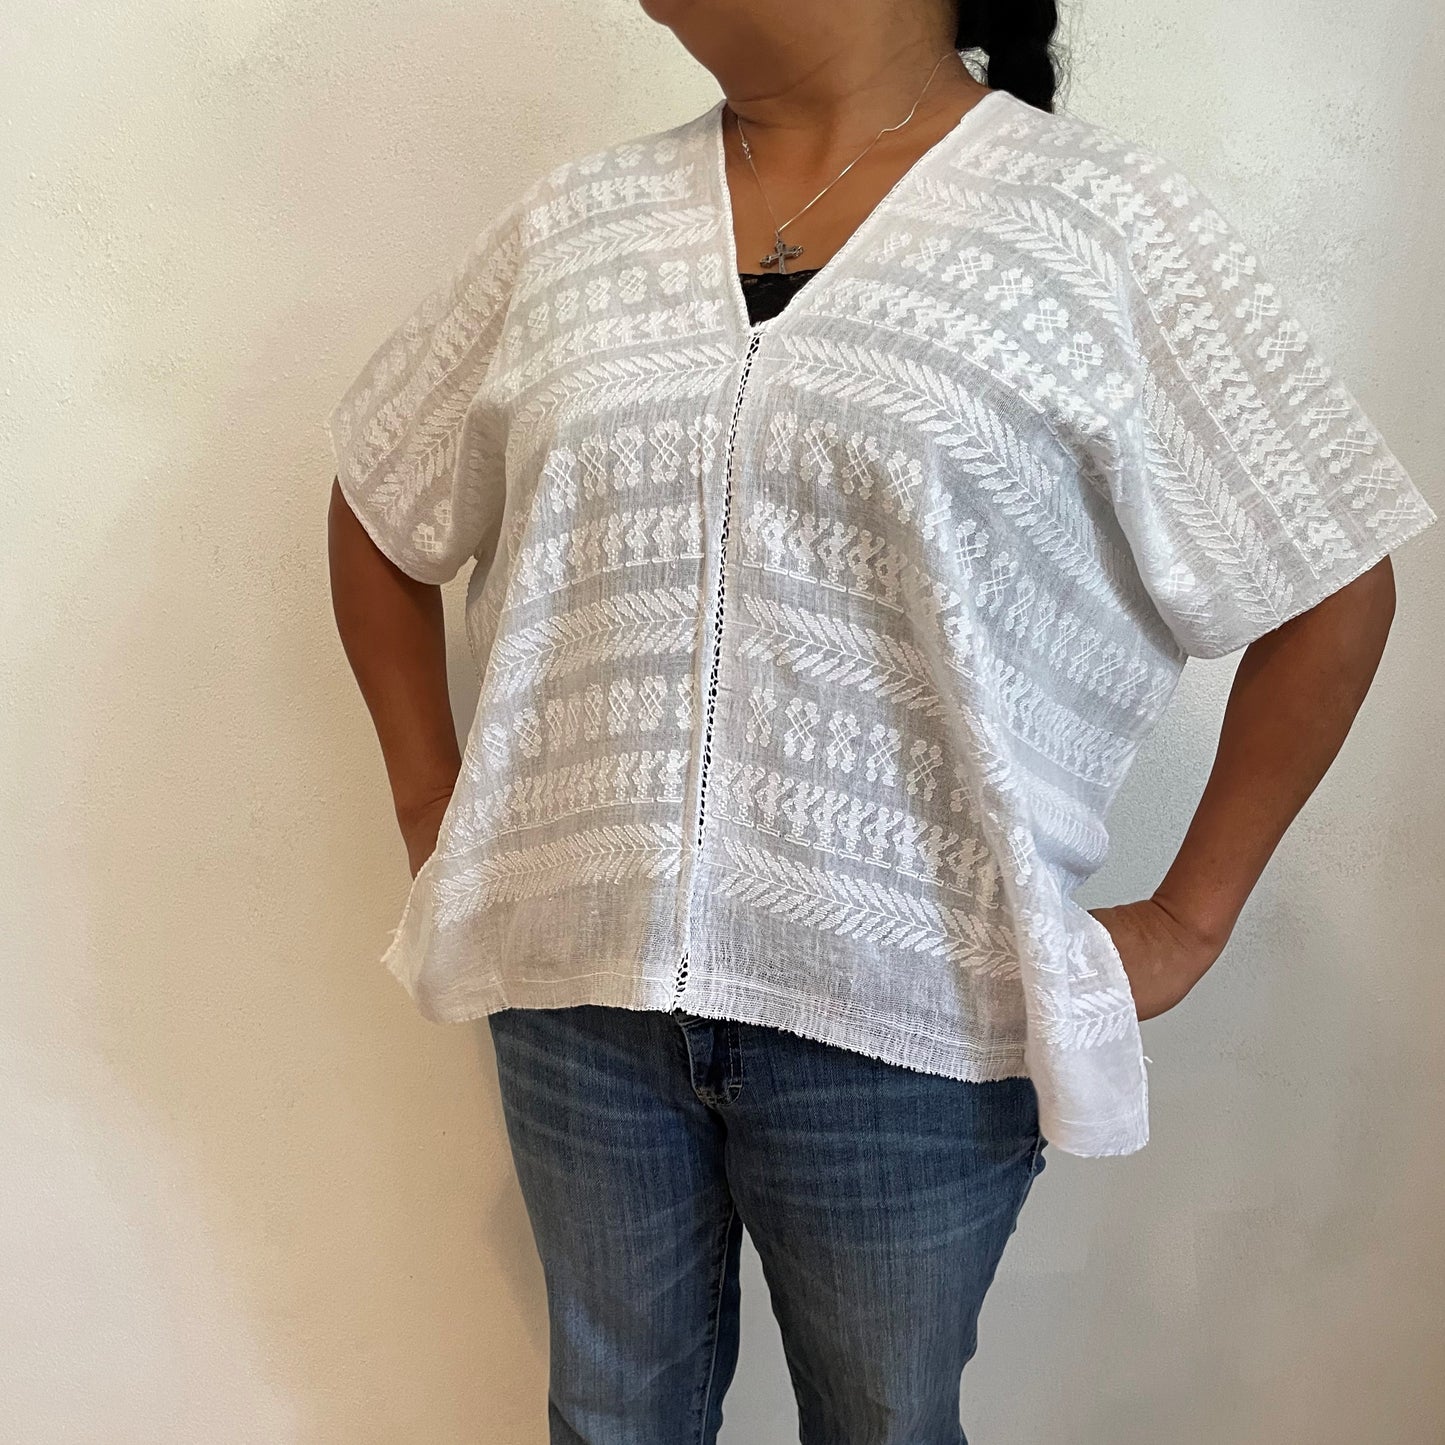 Guatemala, Concepcion Poou Coy Tharin, Huipil in White With 'Women' Design